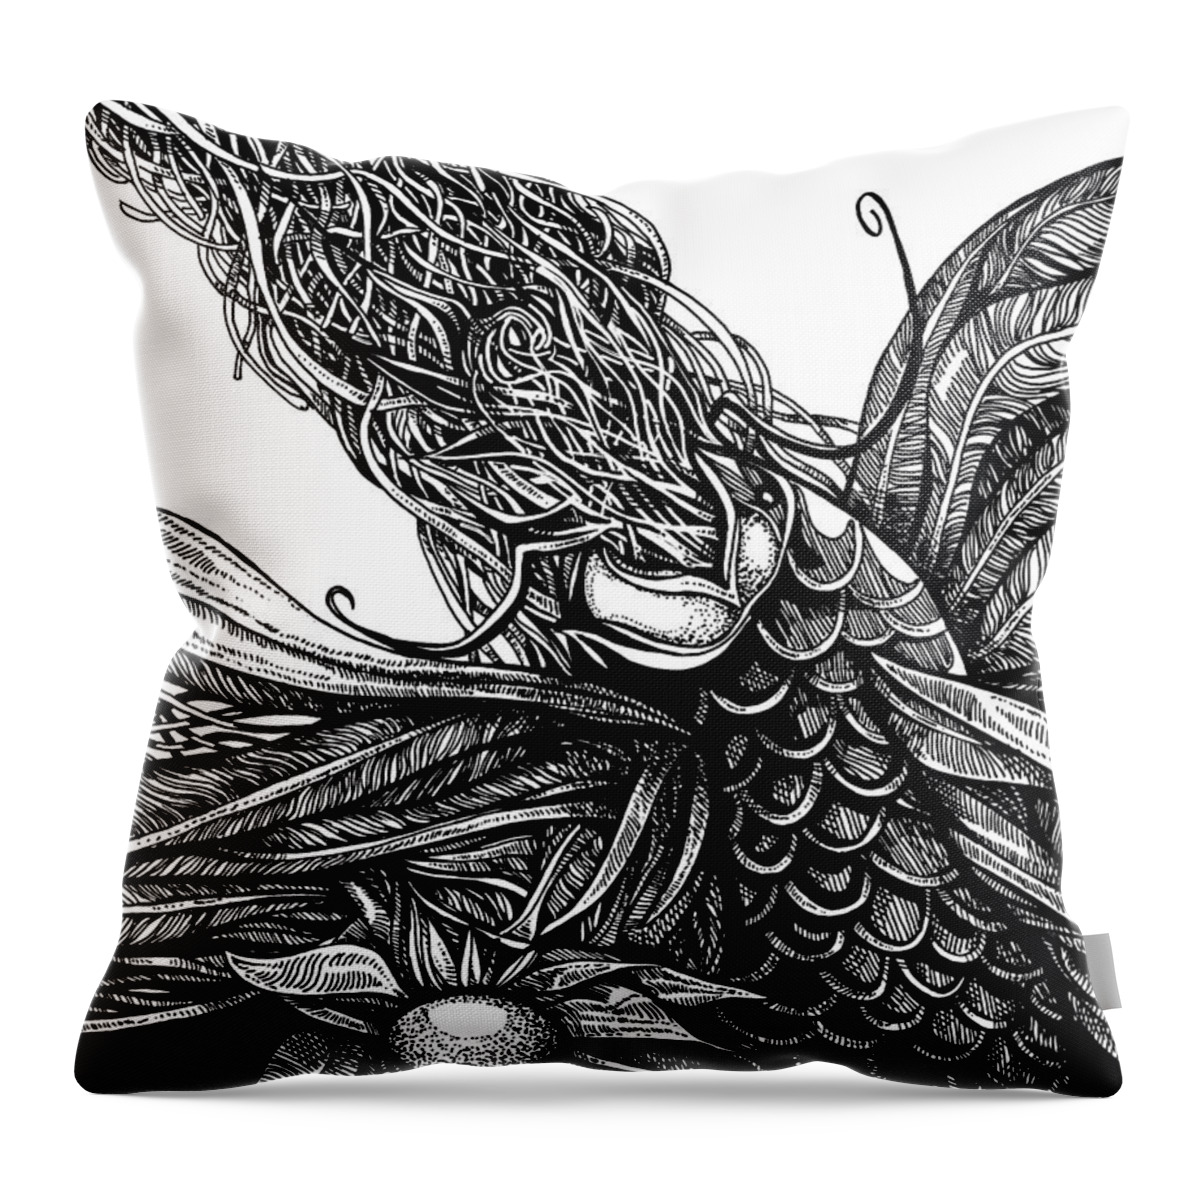 Fish Throw Pillow featuring the drawing Castaway fish by Enrique Zaldivar